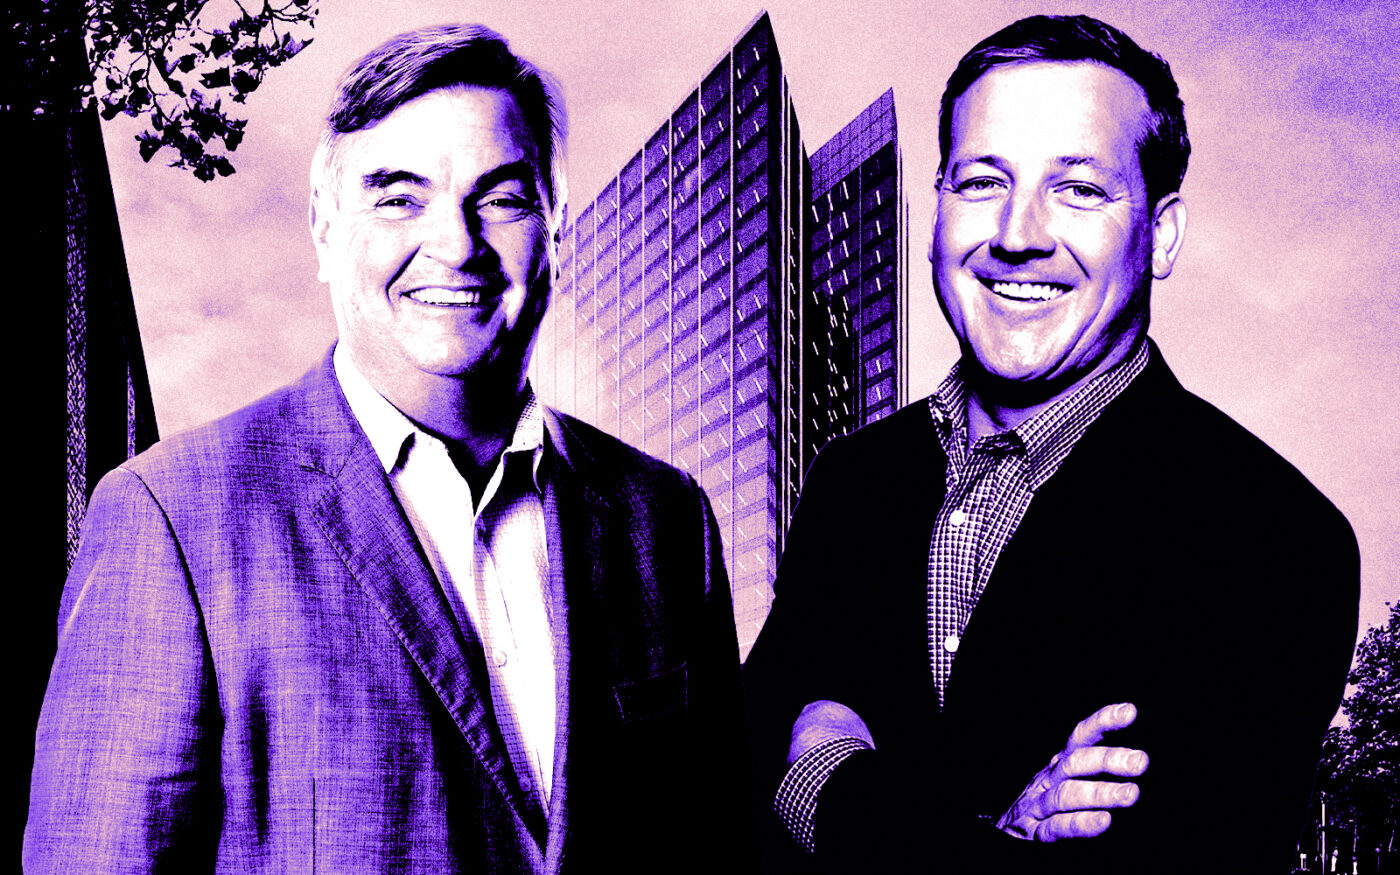 From left: Greenberg Traurig's Brian Duffy and Sterling Bay's Andy Gloor in front of a rendering of 360 North Green Street (Sterling Bay, Greenberg Traurig)